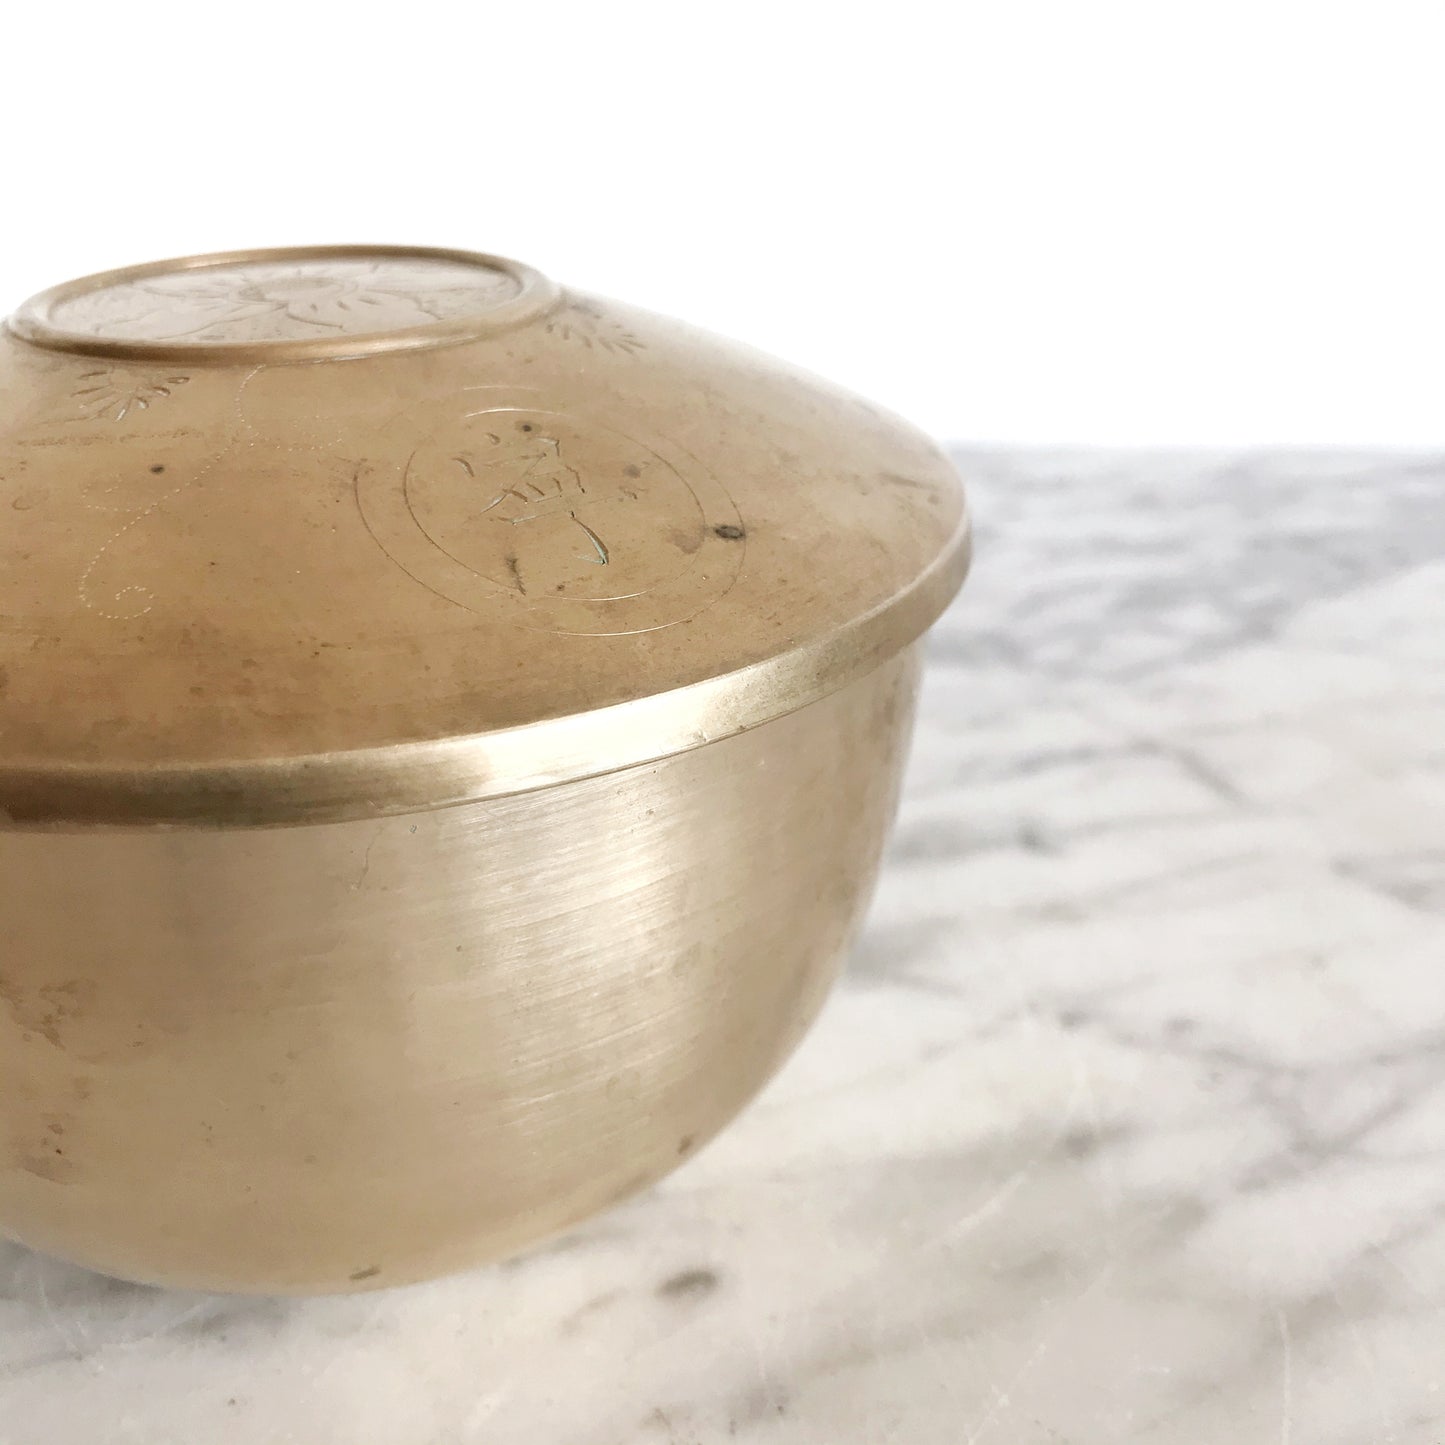 Heavy Vintage Brass Container w Lid